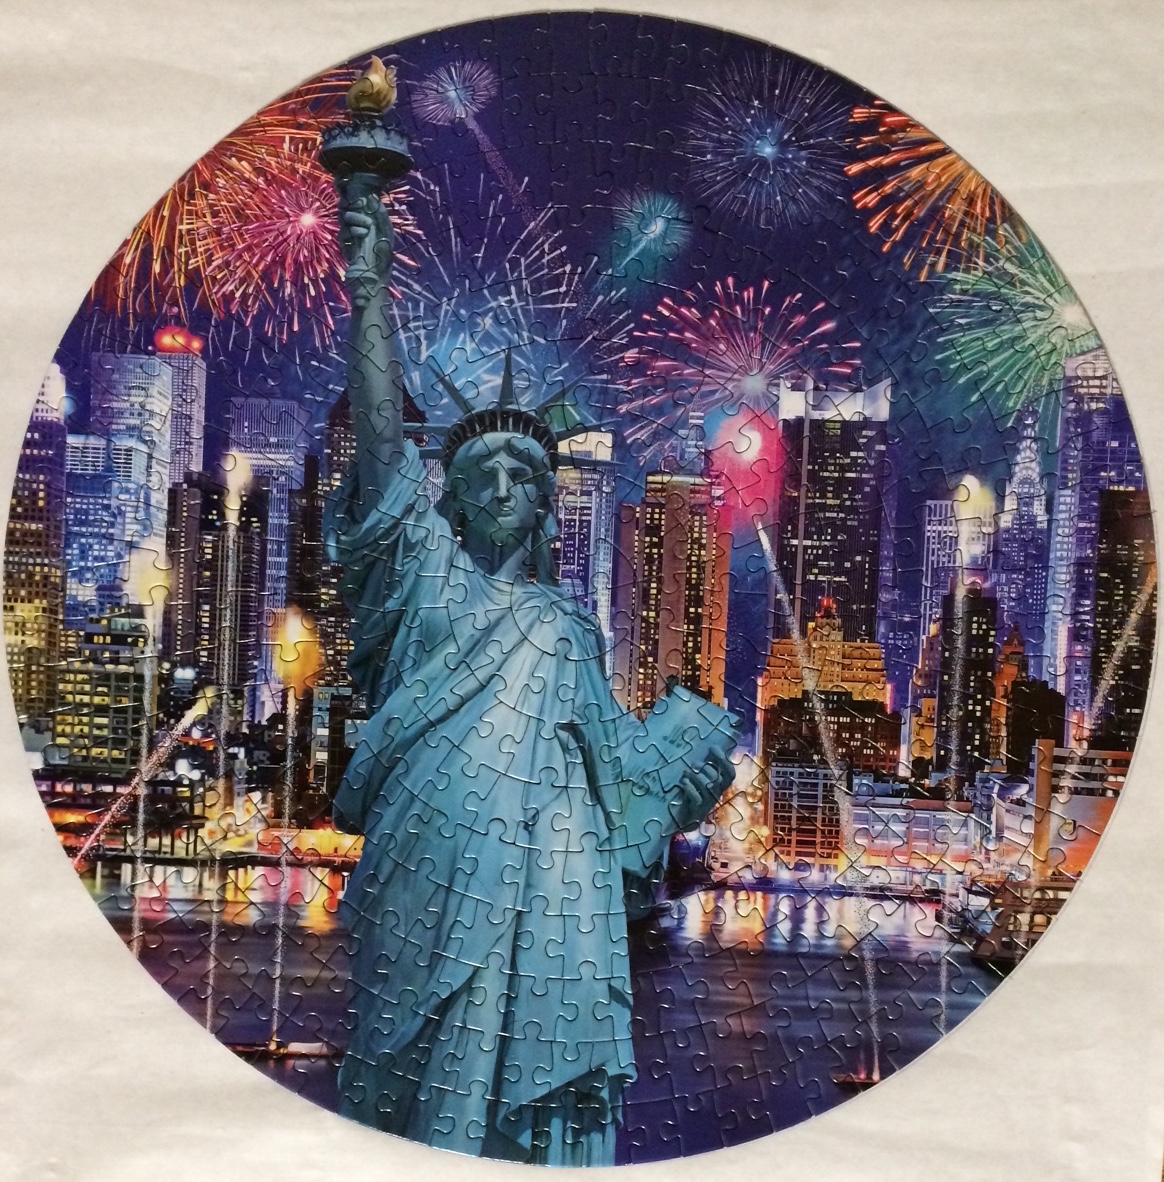 Brand: Lafayette Puzzle Factory

Title: New York

Pieces: 350

Size: 14